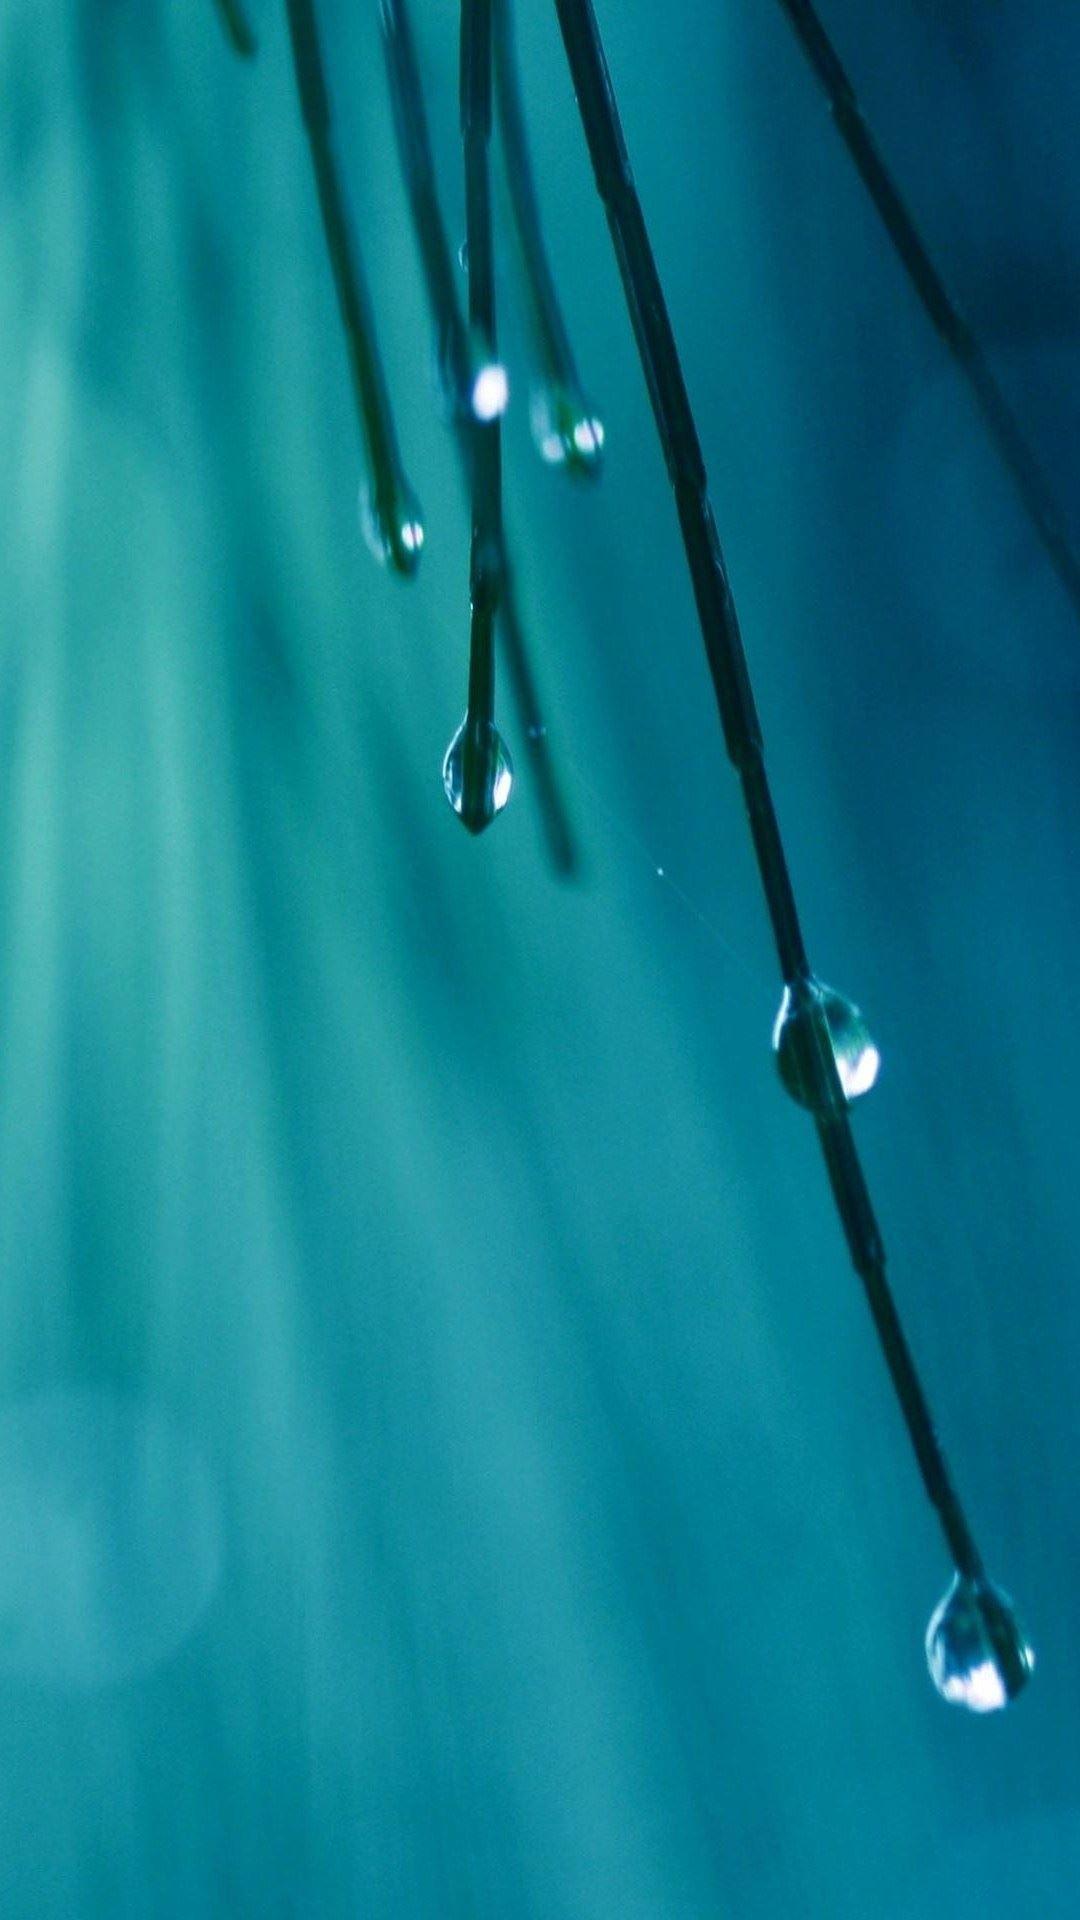 maple leaf and water drop iphone 4s wallpaper. IPhone Wallpaper